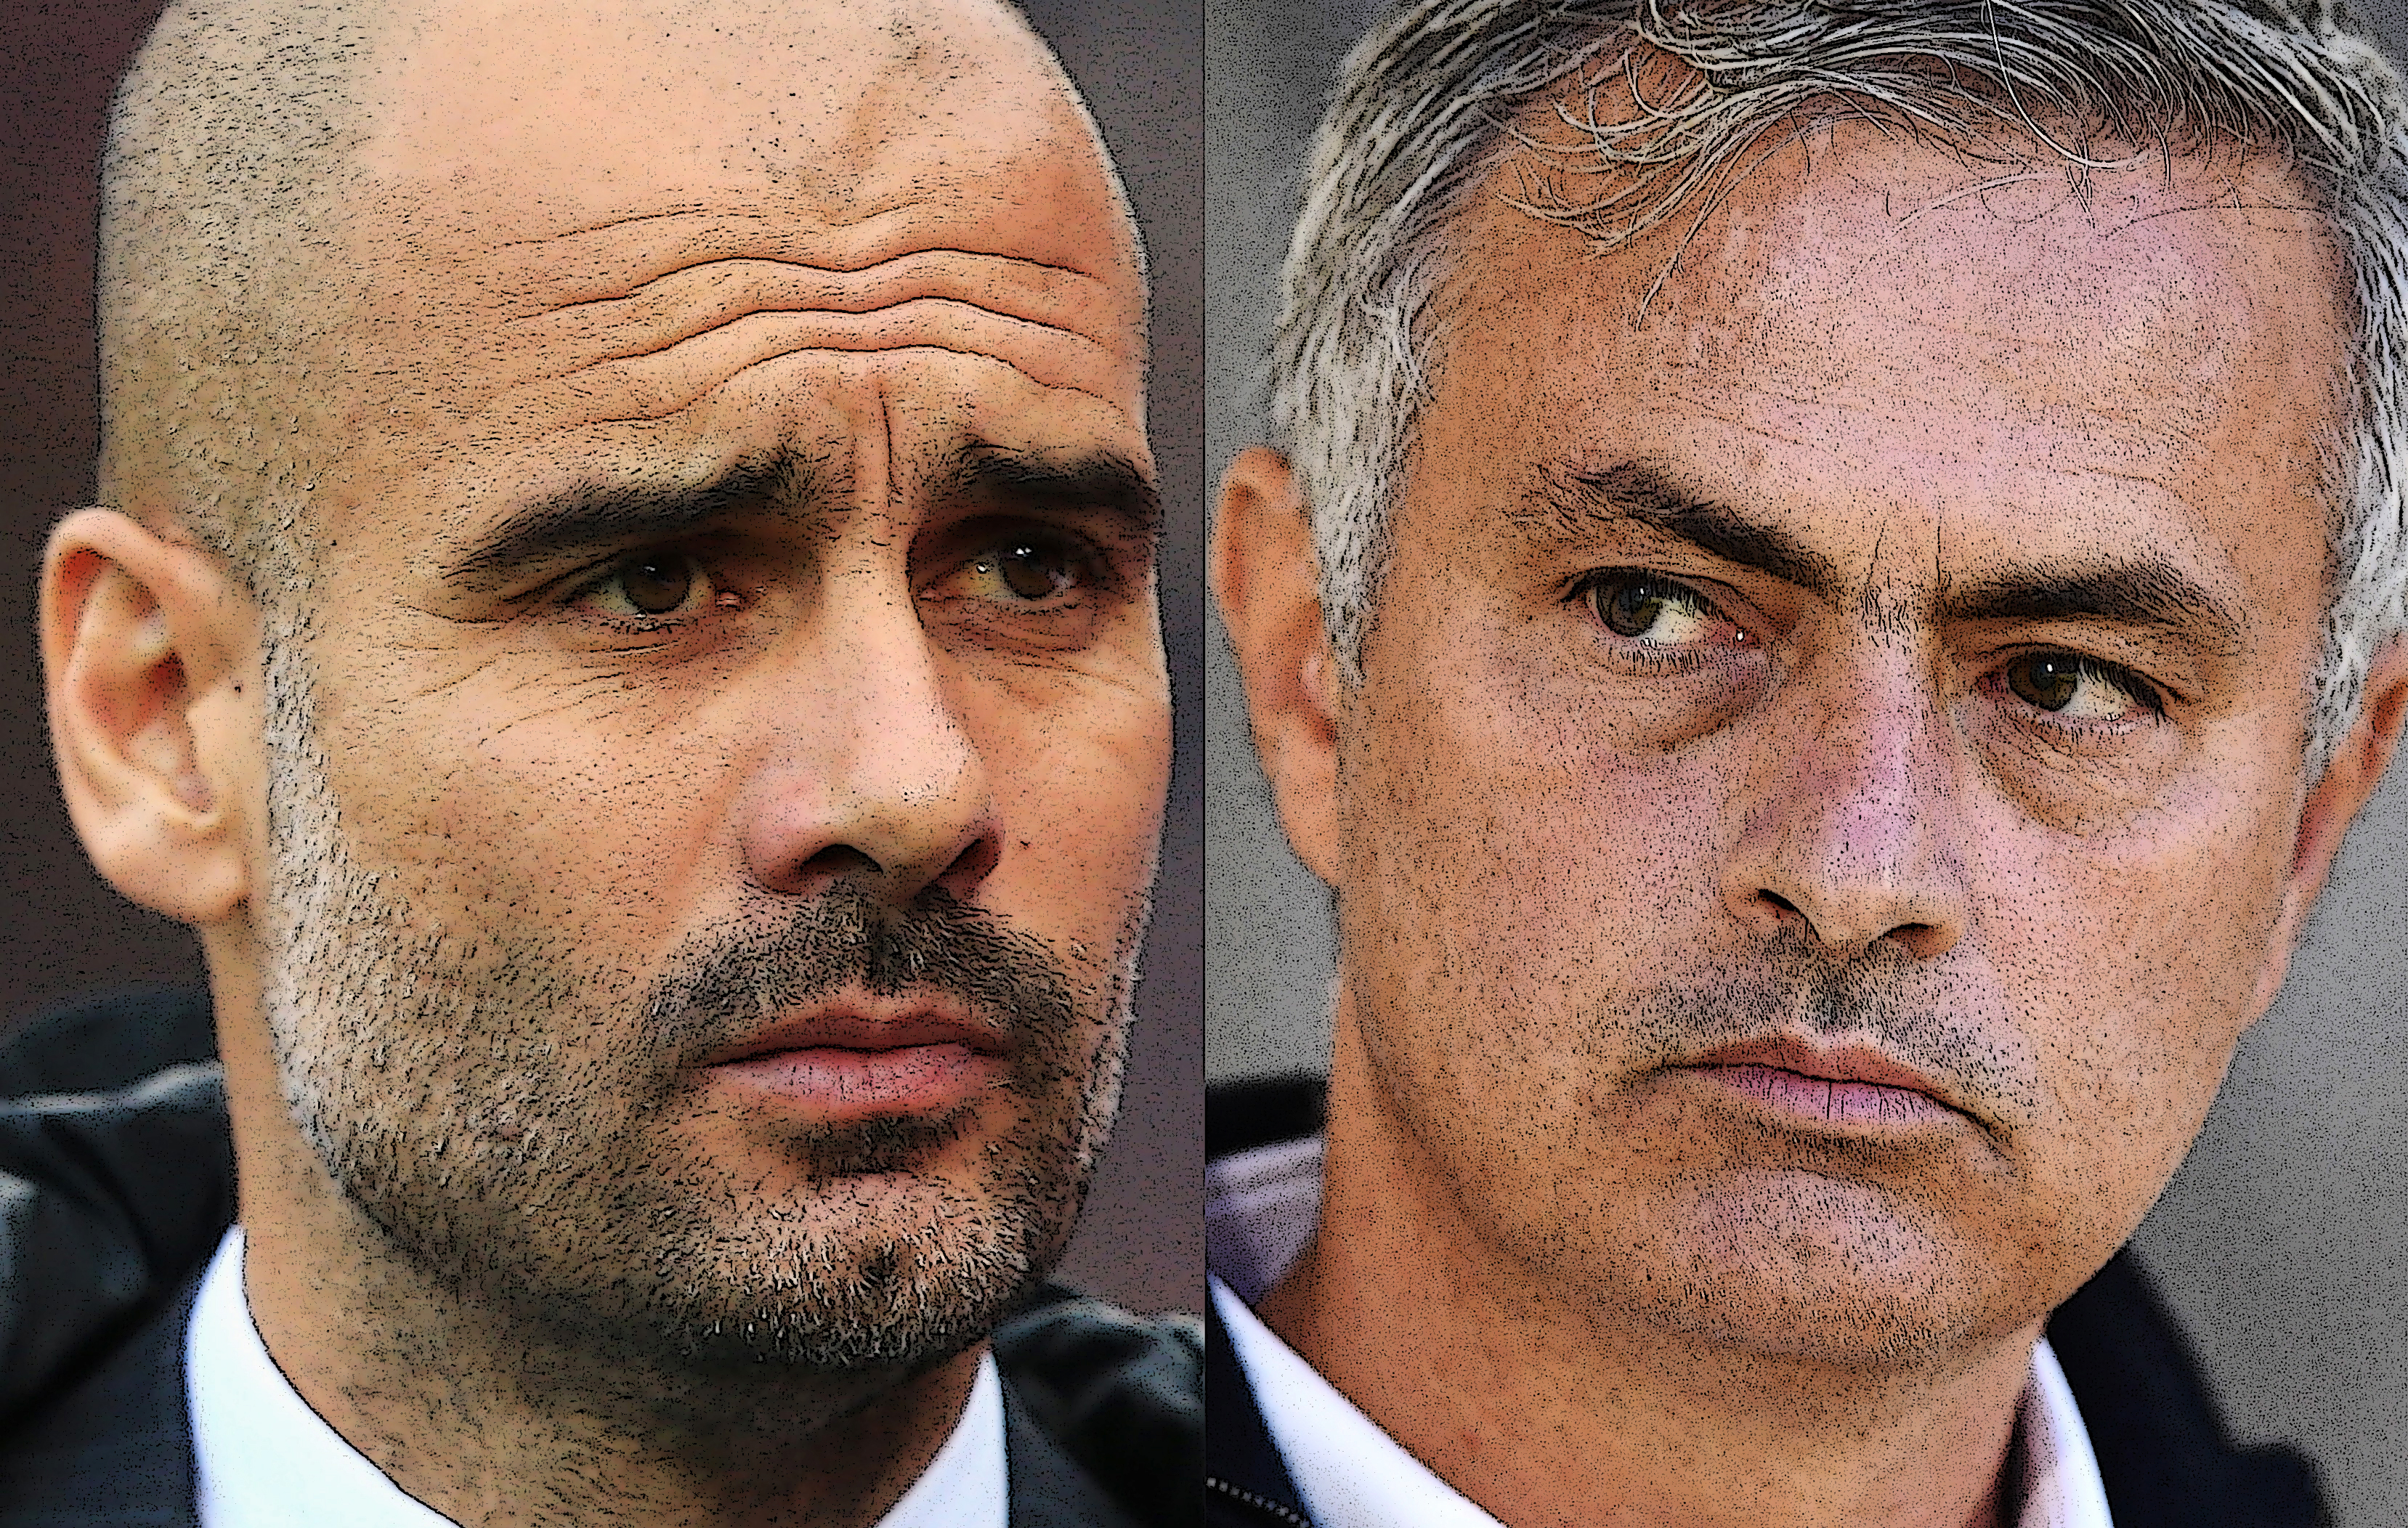 Guardiola and Mourinho face each other at the Etihad tonight (Getty Images)